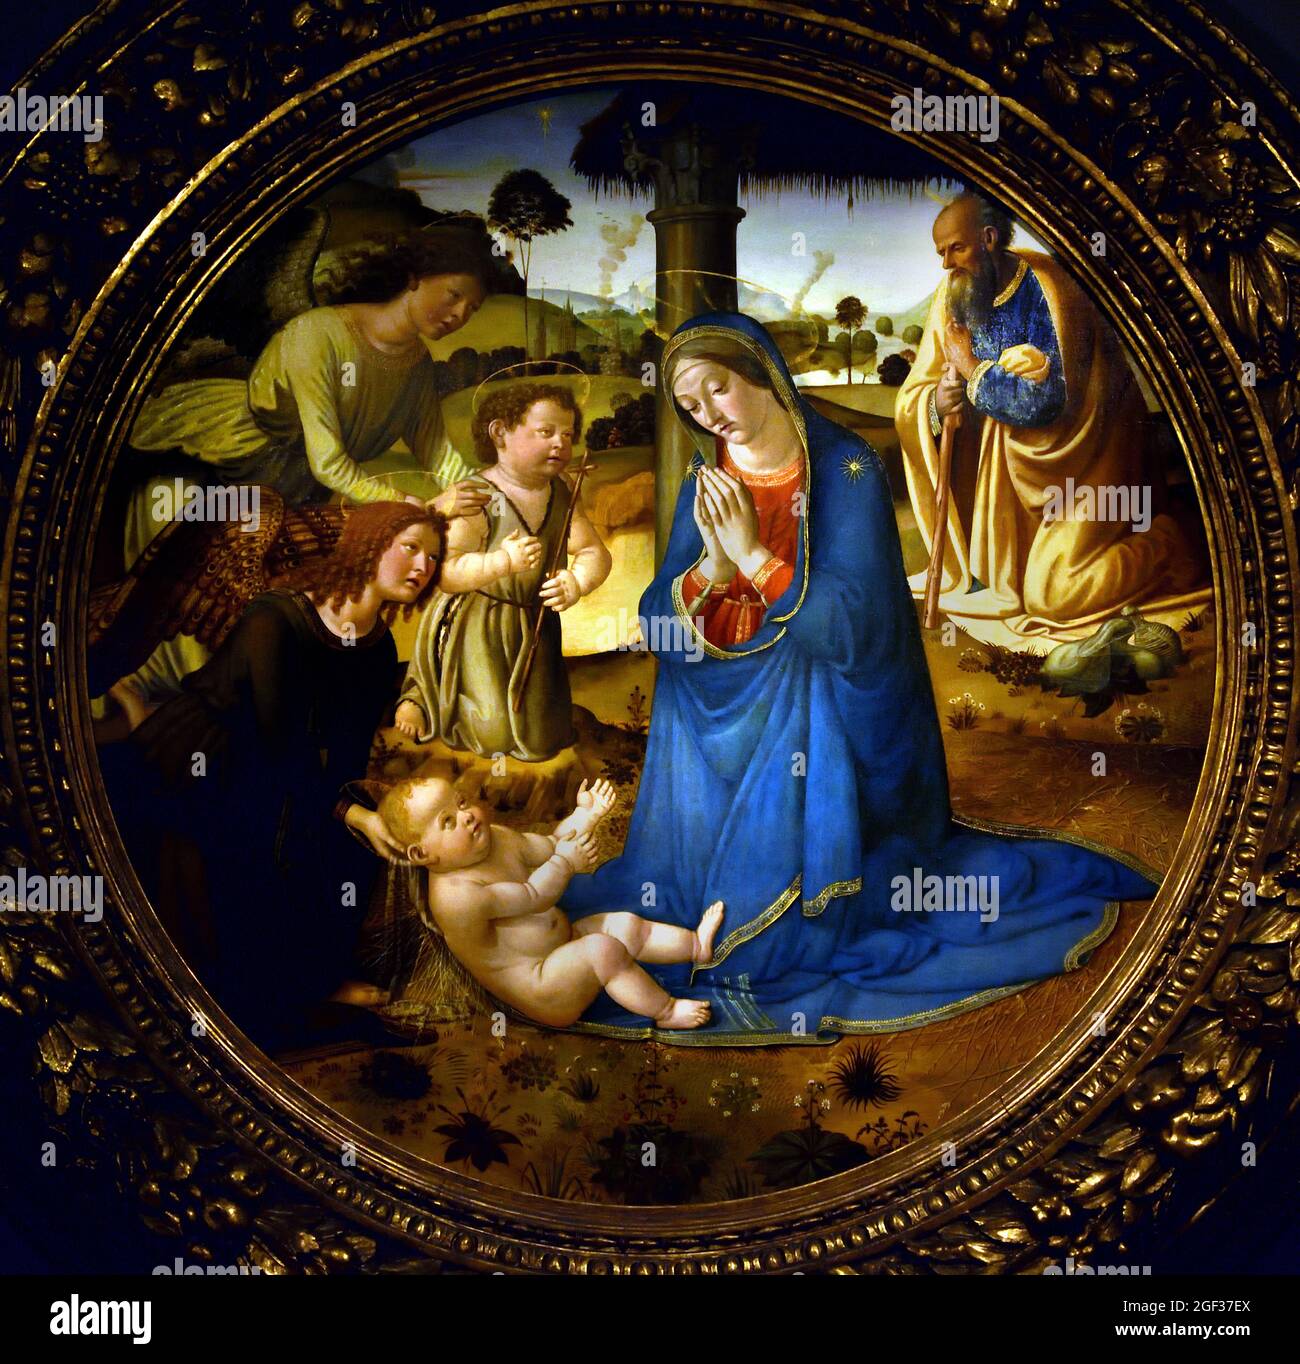 The Adoration of the Christ Child,  1485 - 1507 by Cosimo Rosselli, 1439-1507 Italy, Italian, Cosimo Rosselli was a successful independent master and teacher whose work is typical of artistic production in Florence during the second half of the 15th century. Stock Photo